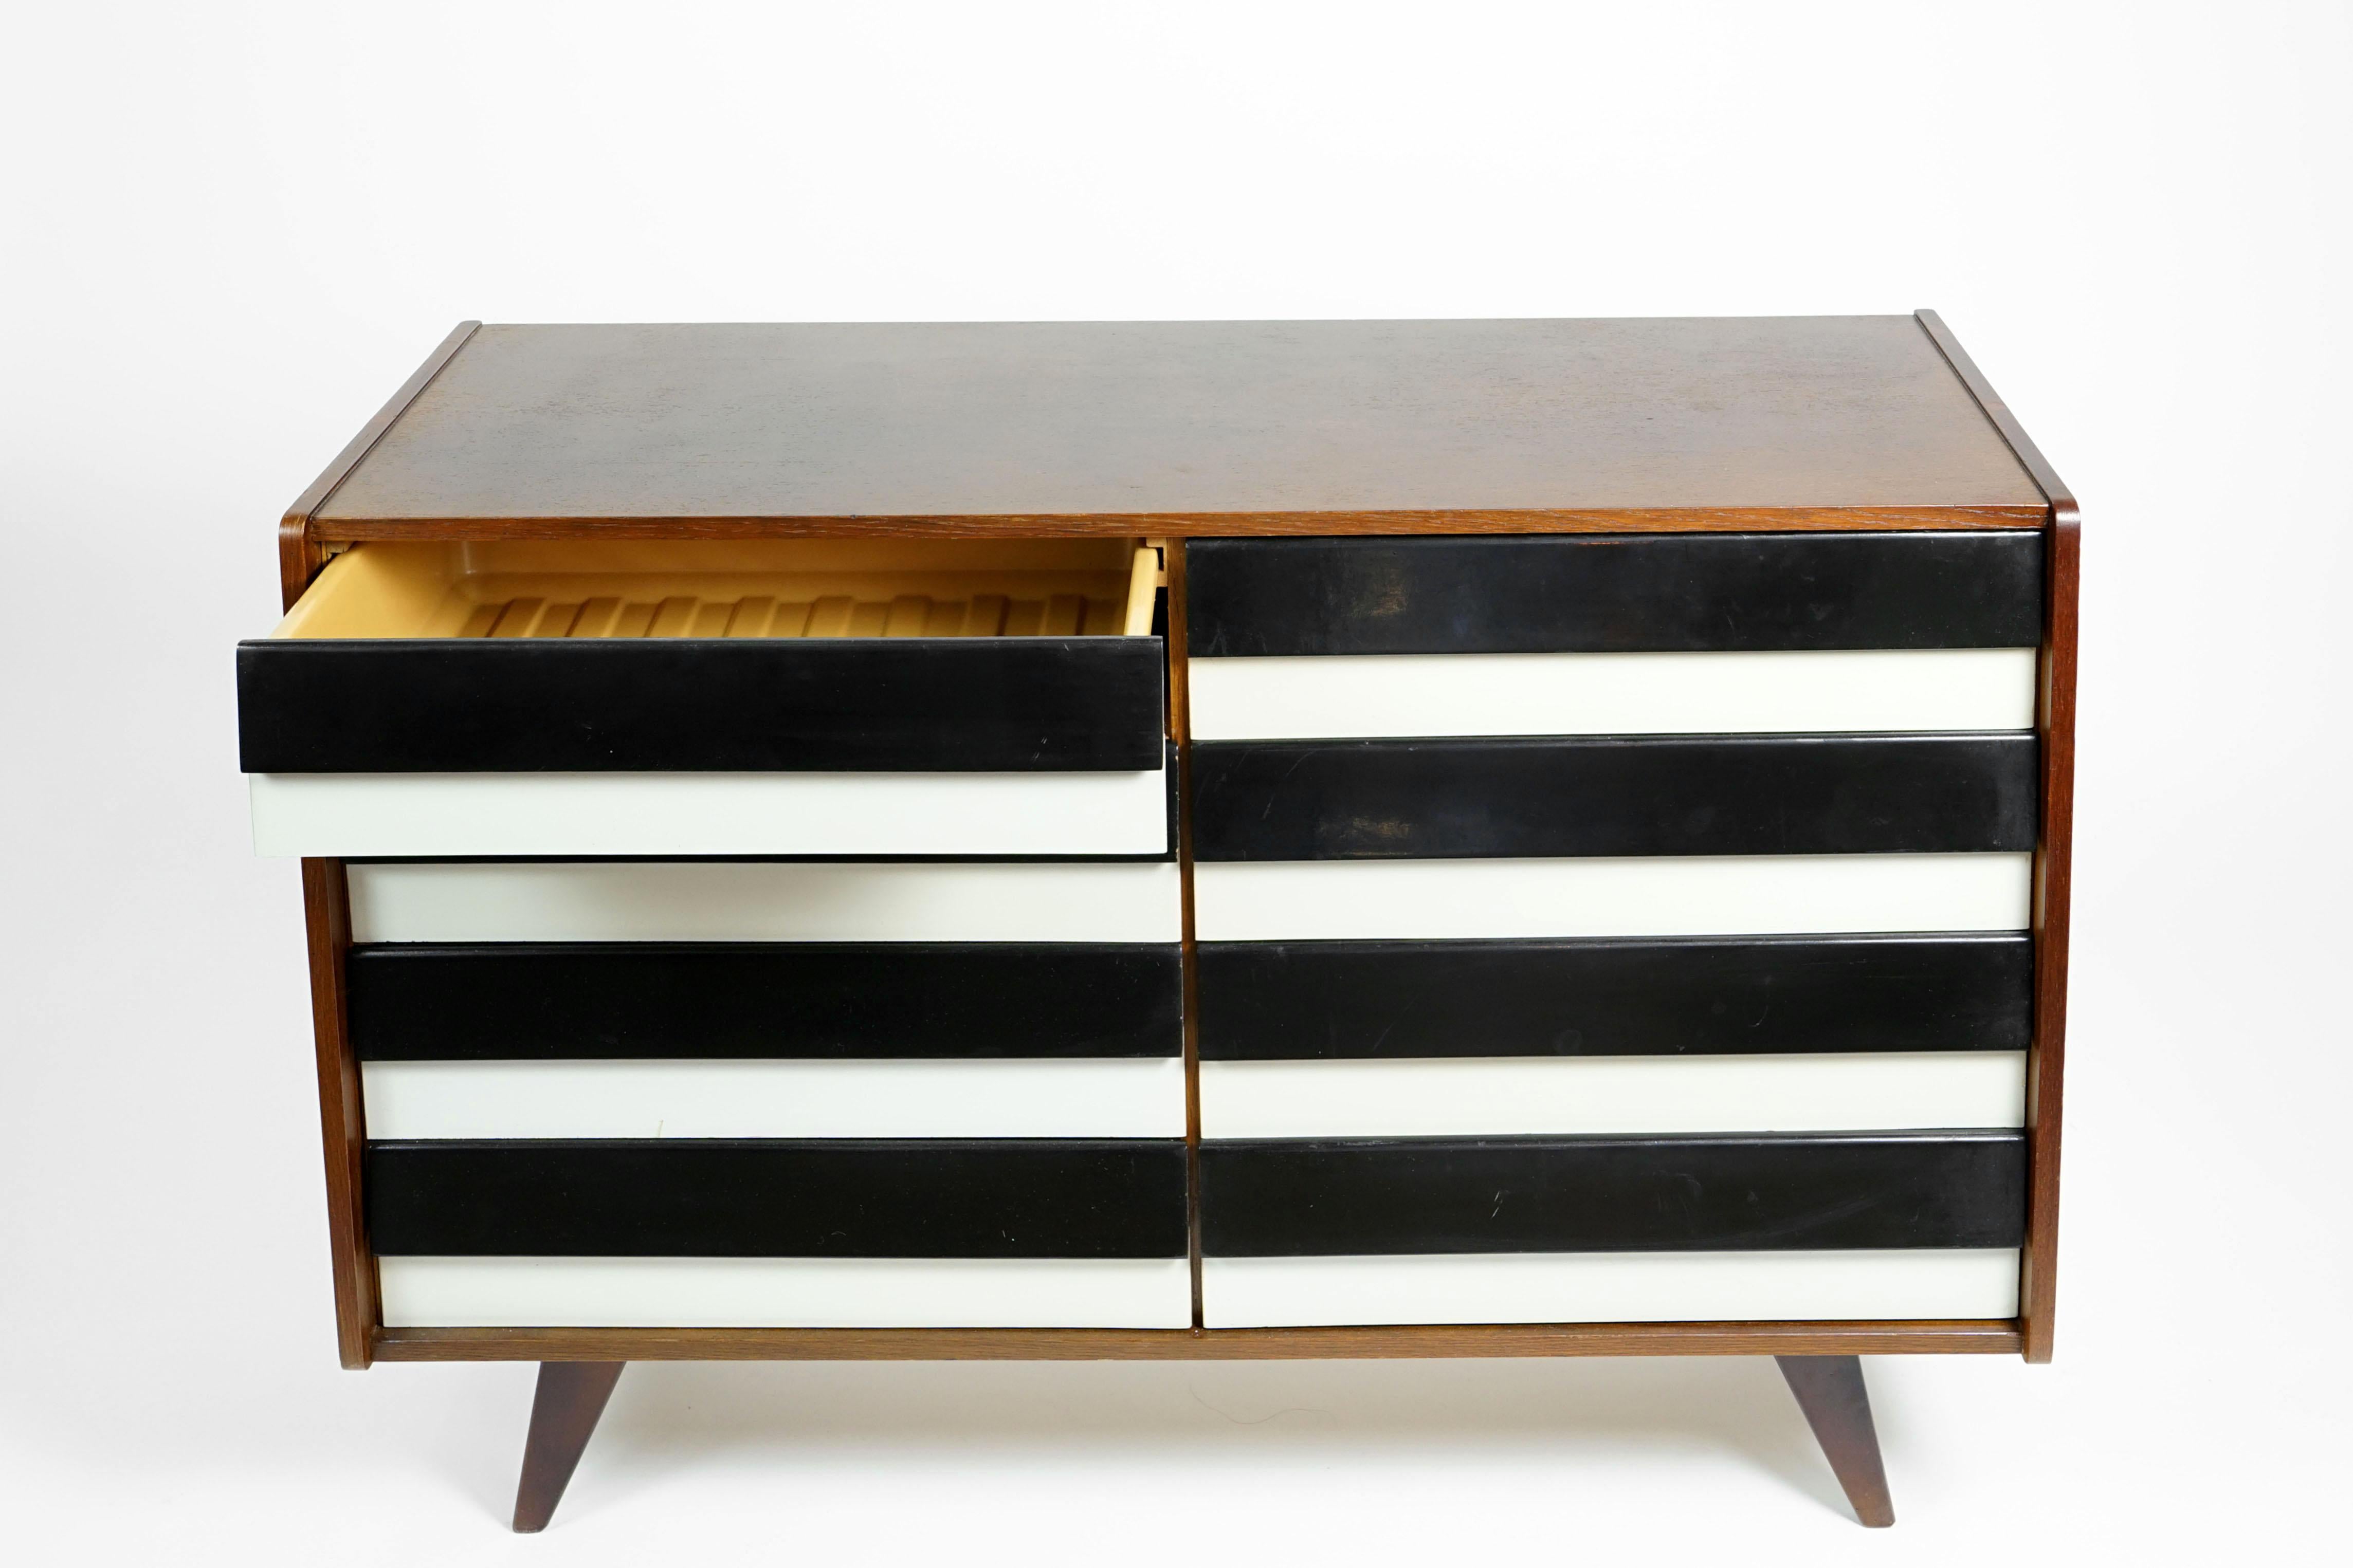 Midcentury sideboard with black and white drawers.
Designed by Czech furniture and interior designer Jiri Jiroutek in the 1960s for Interieur Praha.
Drawers are made of plastic. The wood is completely restored.
 